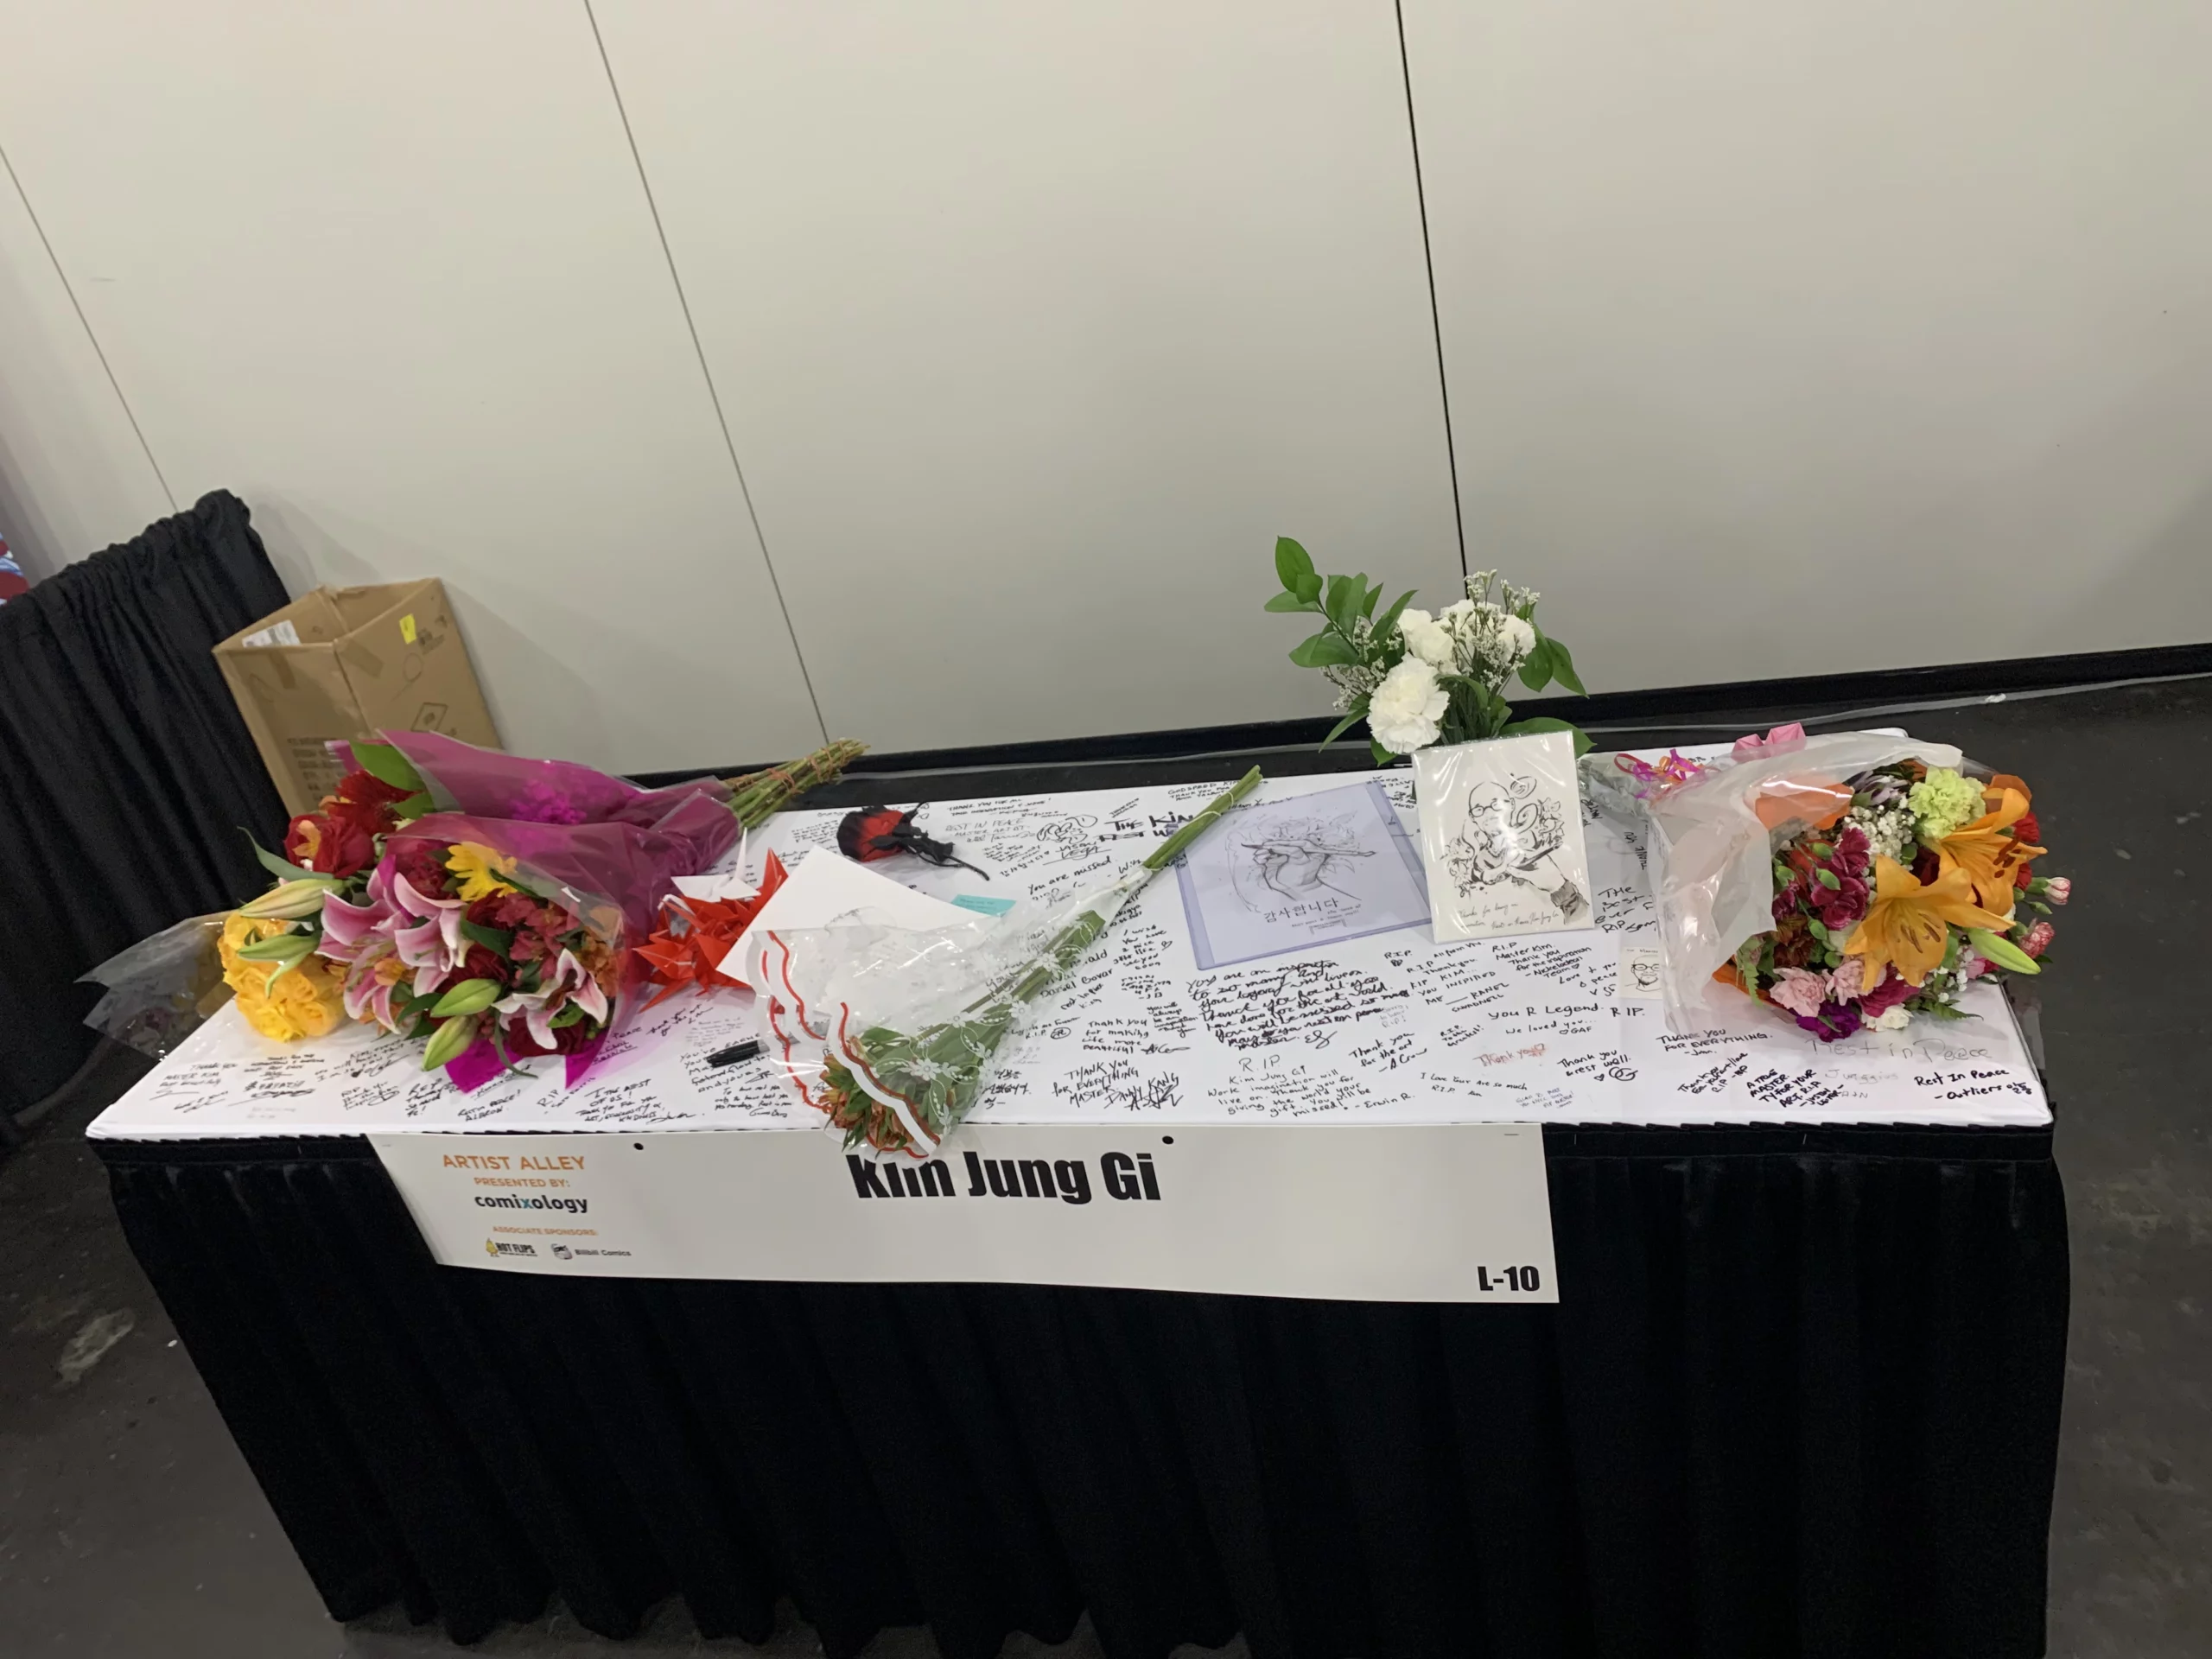 Flowers and notes left on Kim Jung Gi's Artist Alley table at New York Comic Con